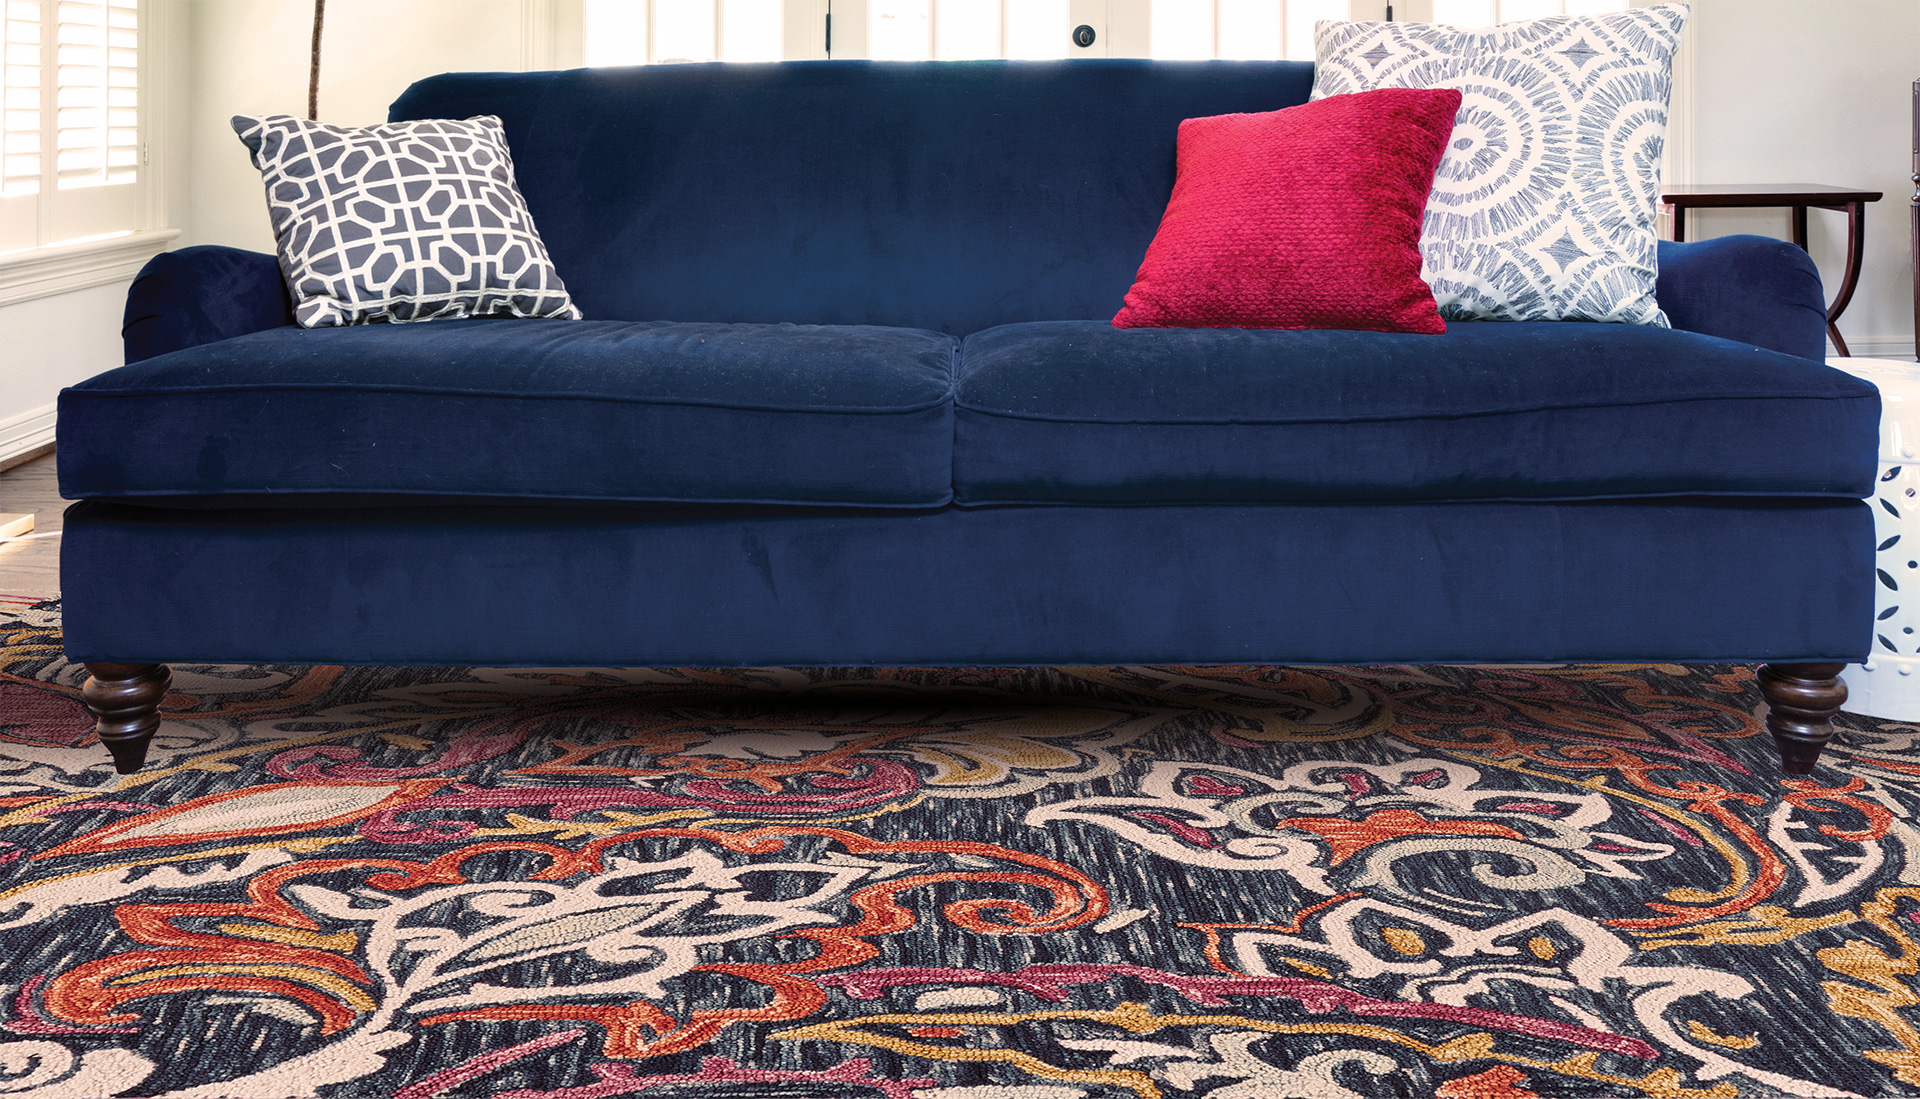 Feizy patterned area rug under two seater sofa with three throw pillows